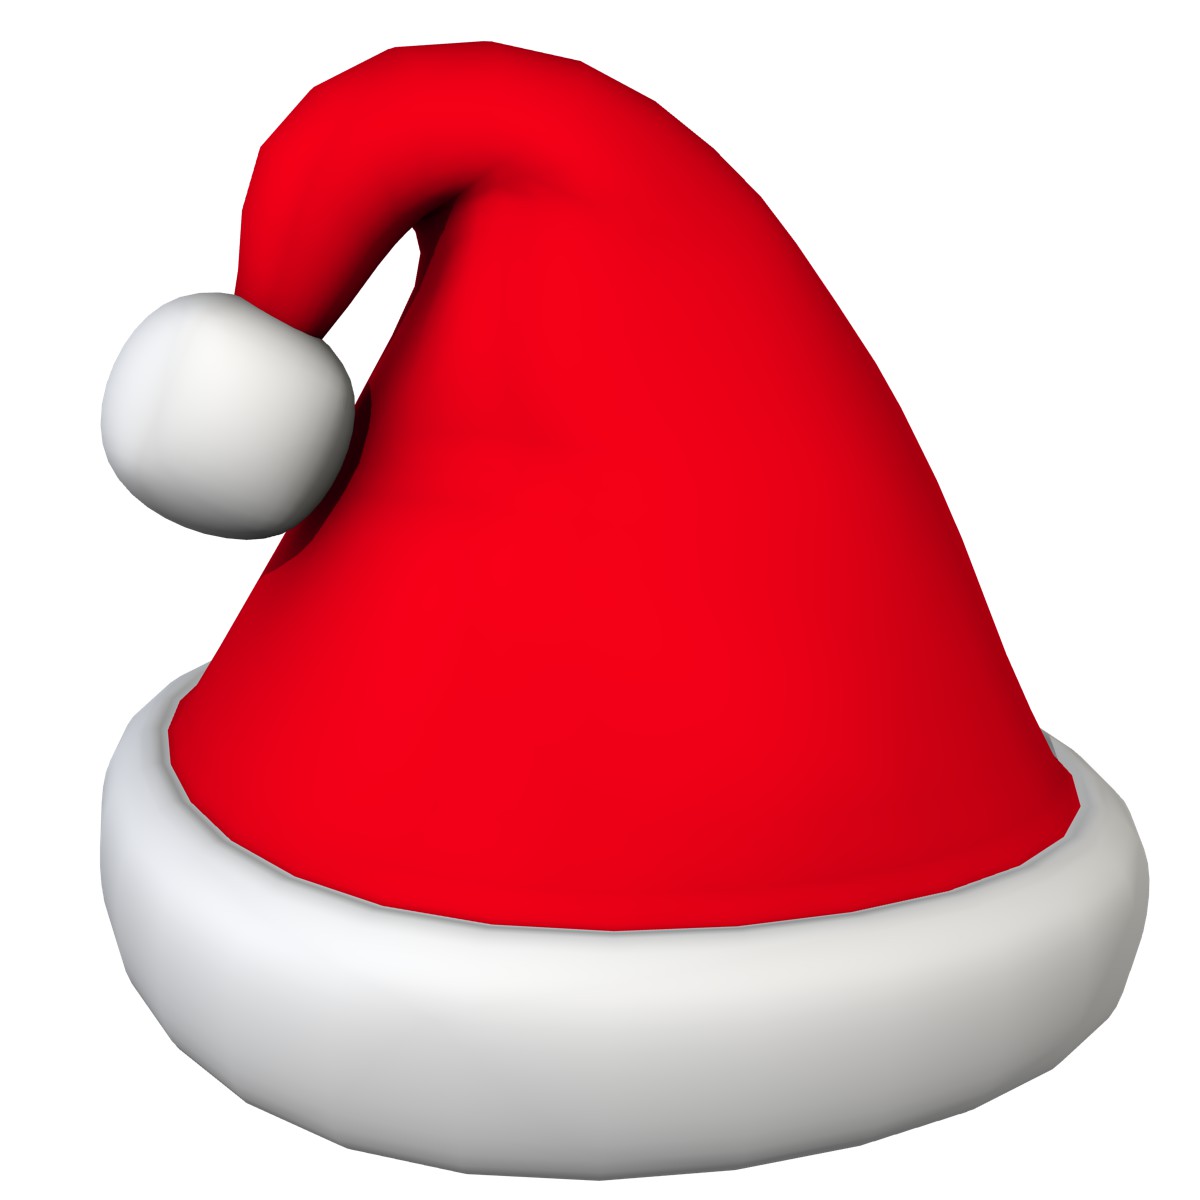 father christmas hat clipart - photo #45